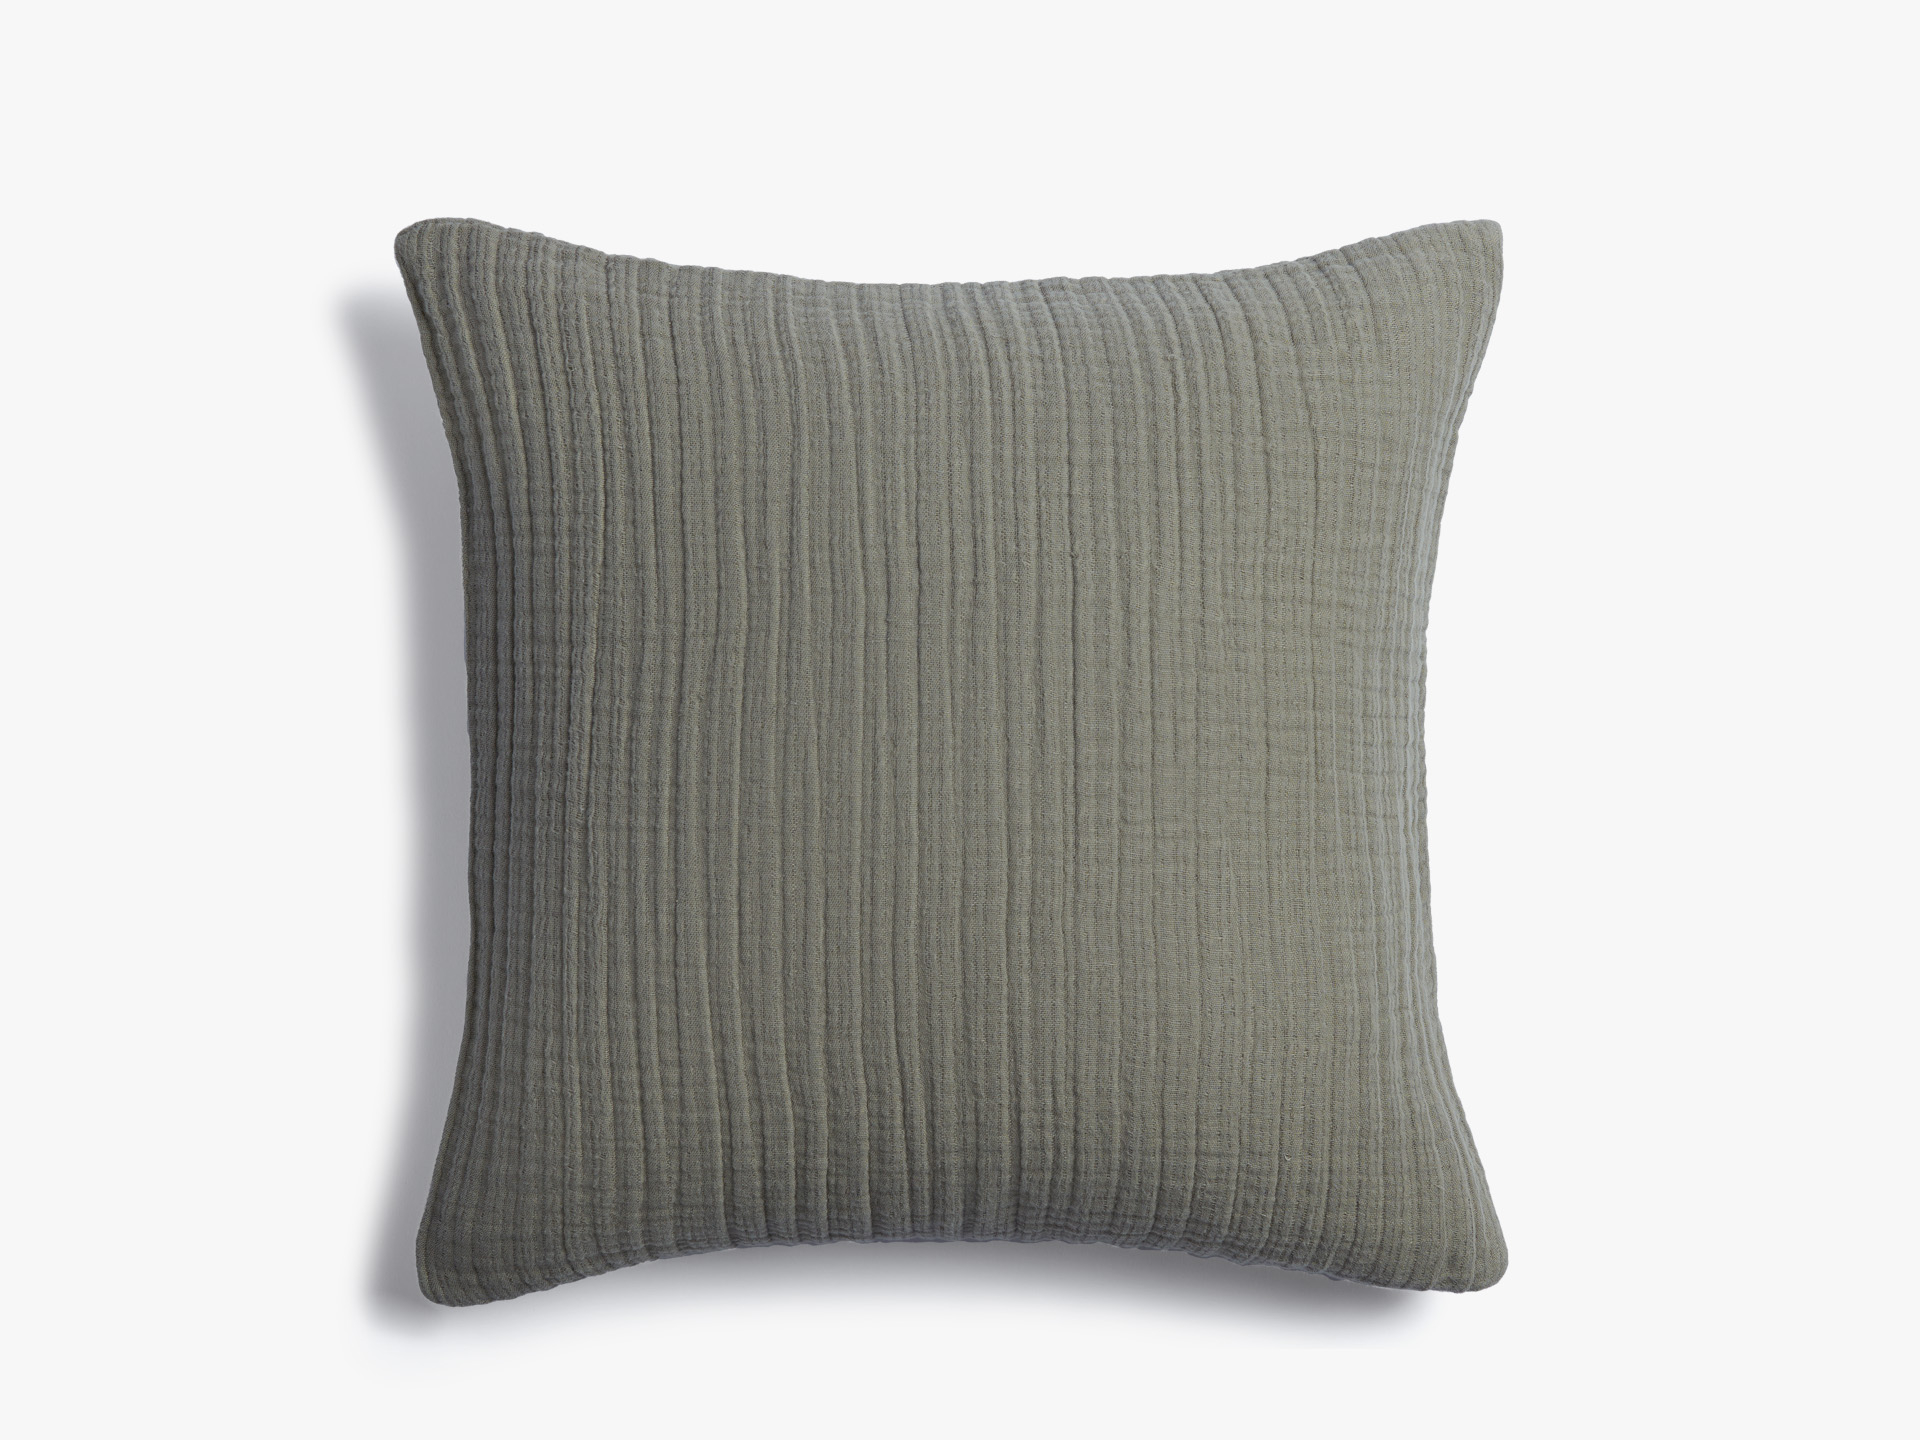 Cloud Soft Throw Pillow Cover SQ - Olive and Linen